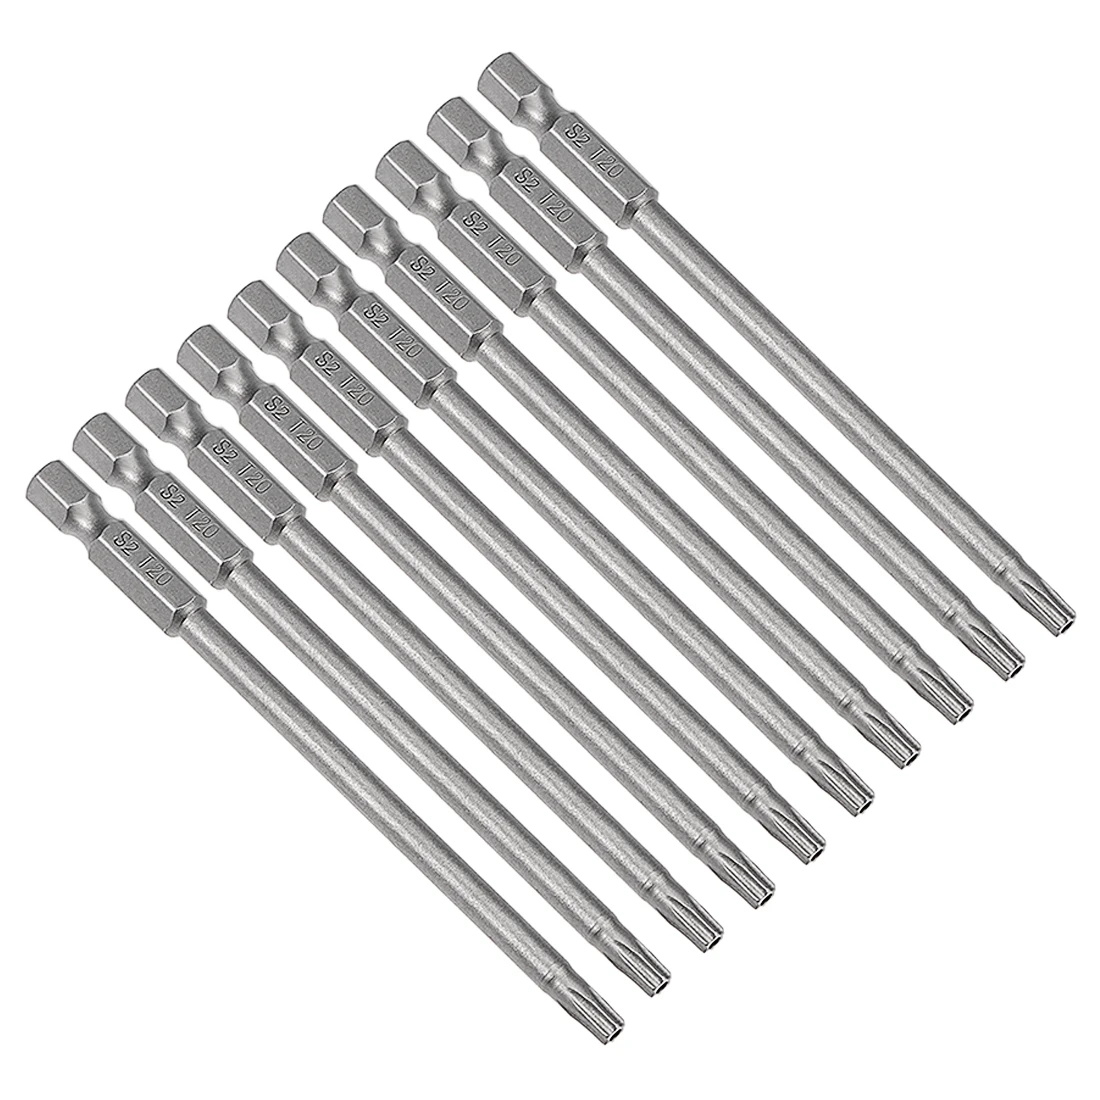 

uxcell 10 Pcs 1/4" Hex Shank T20 Magnetic Security Torx Screwdriver Bits 100mm Length